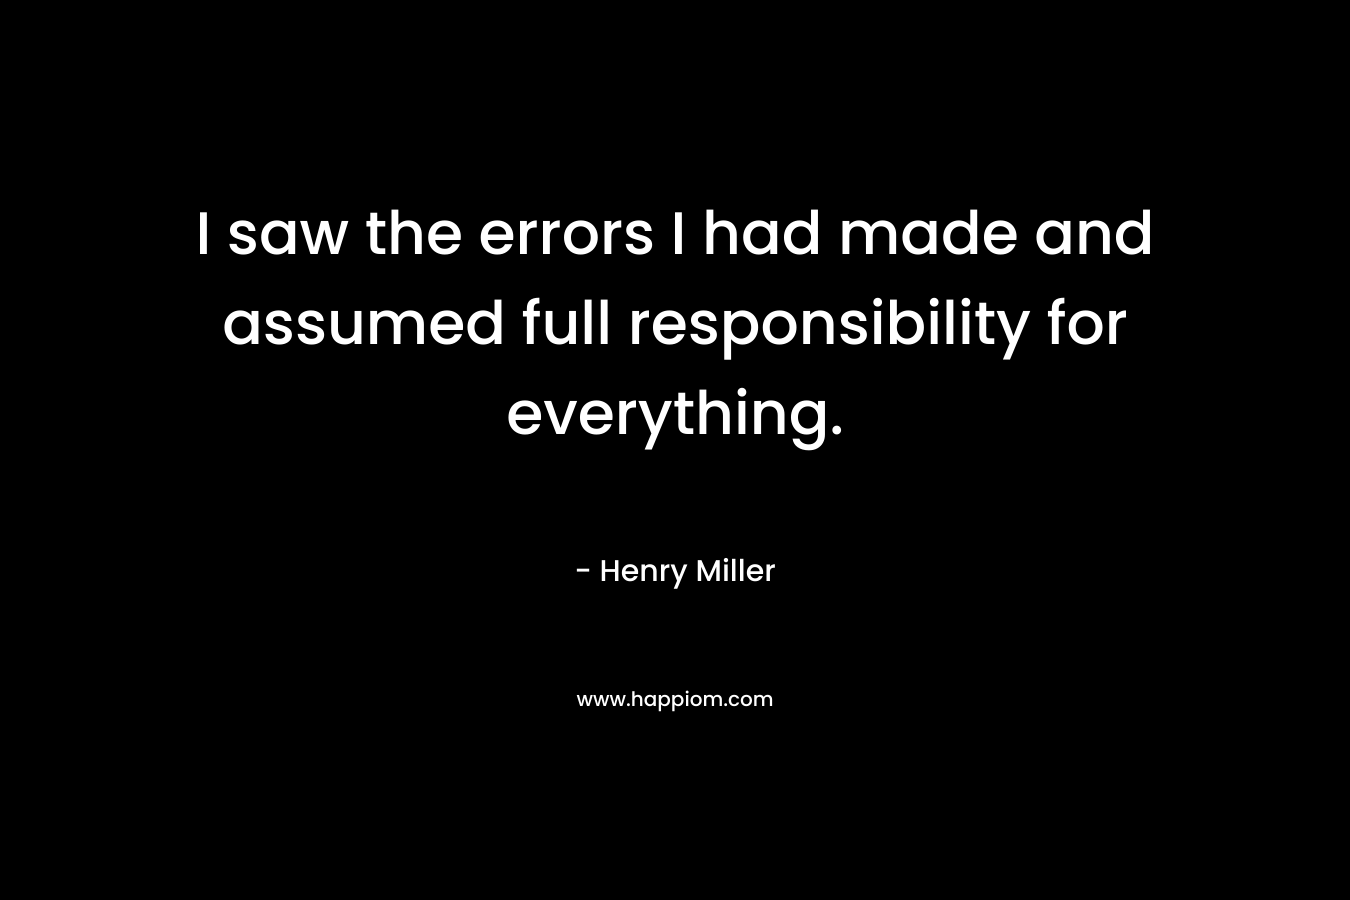 I saw the errors I had made and assumed full responsibility for everything.